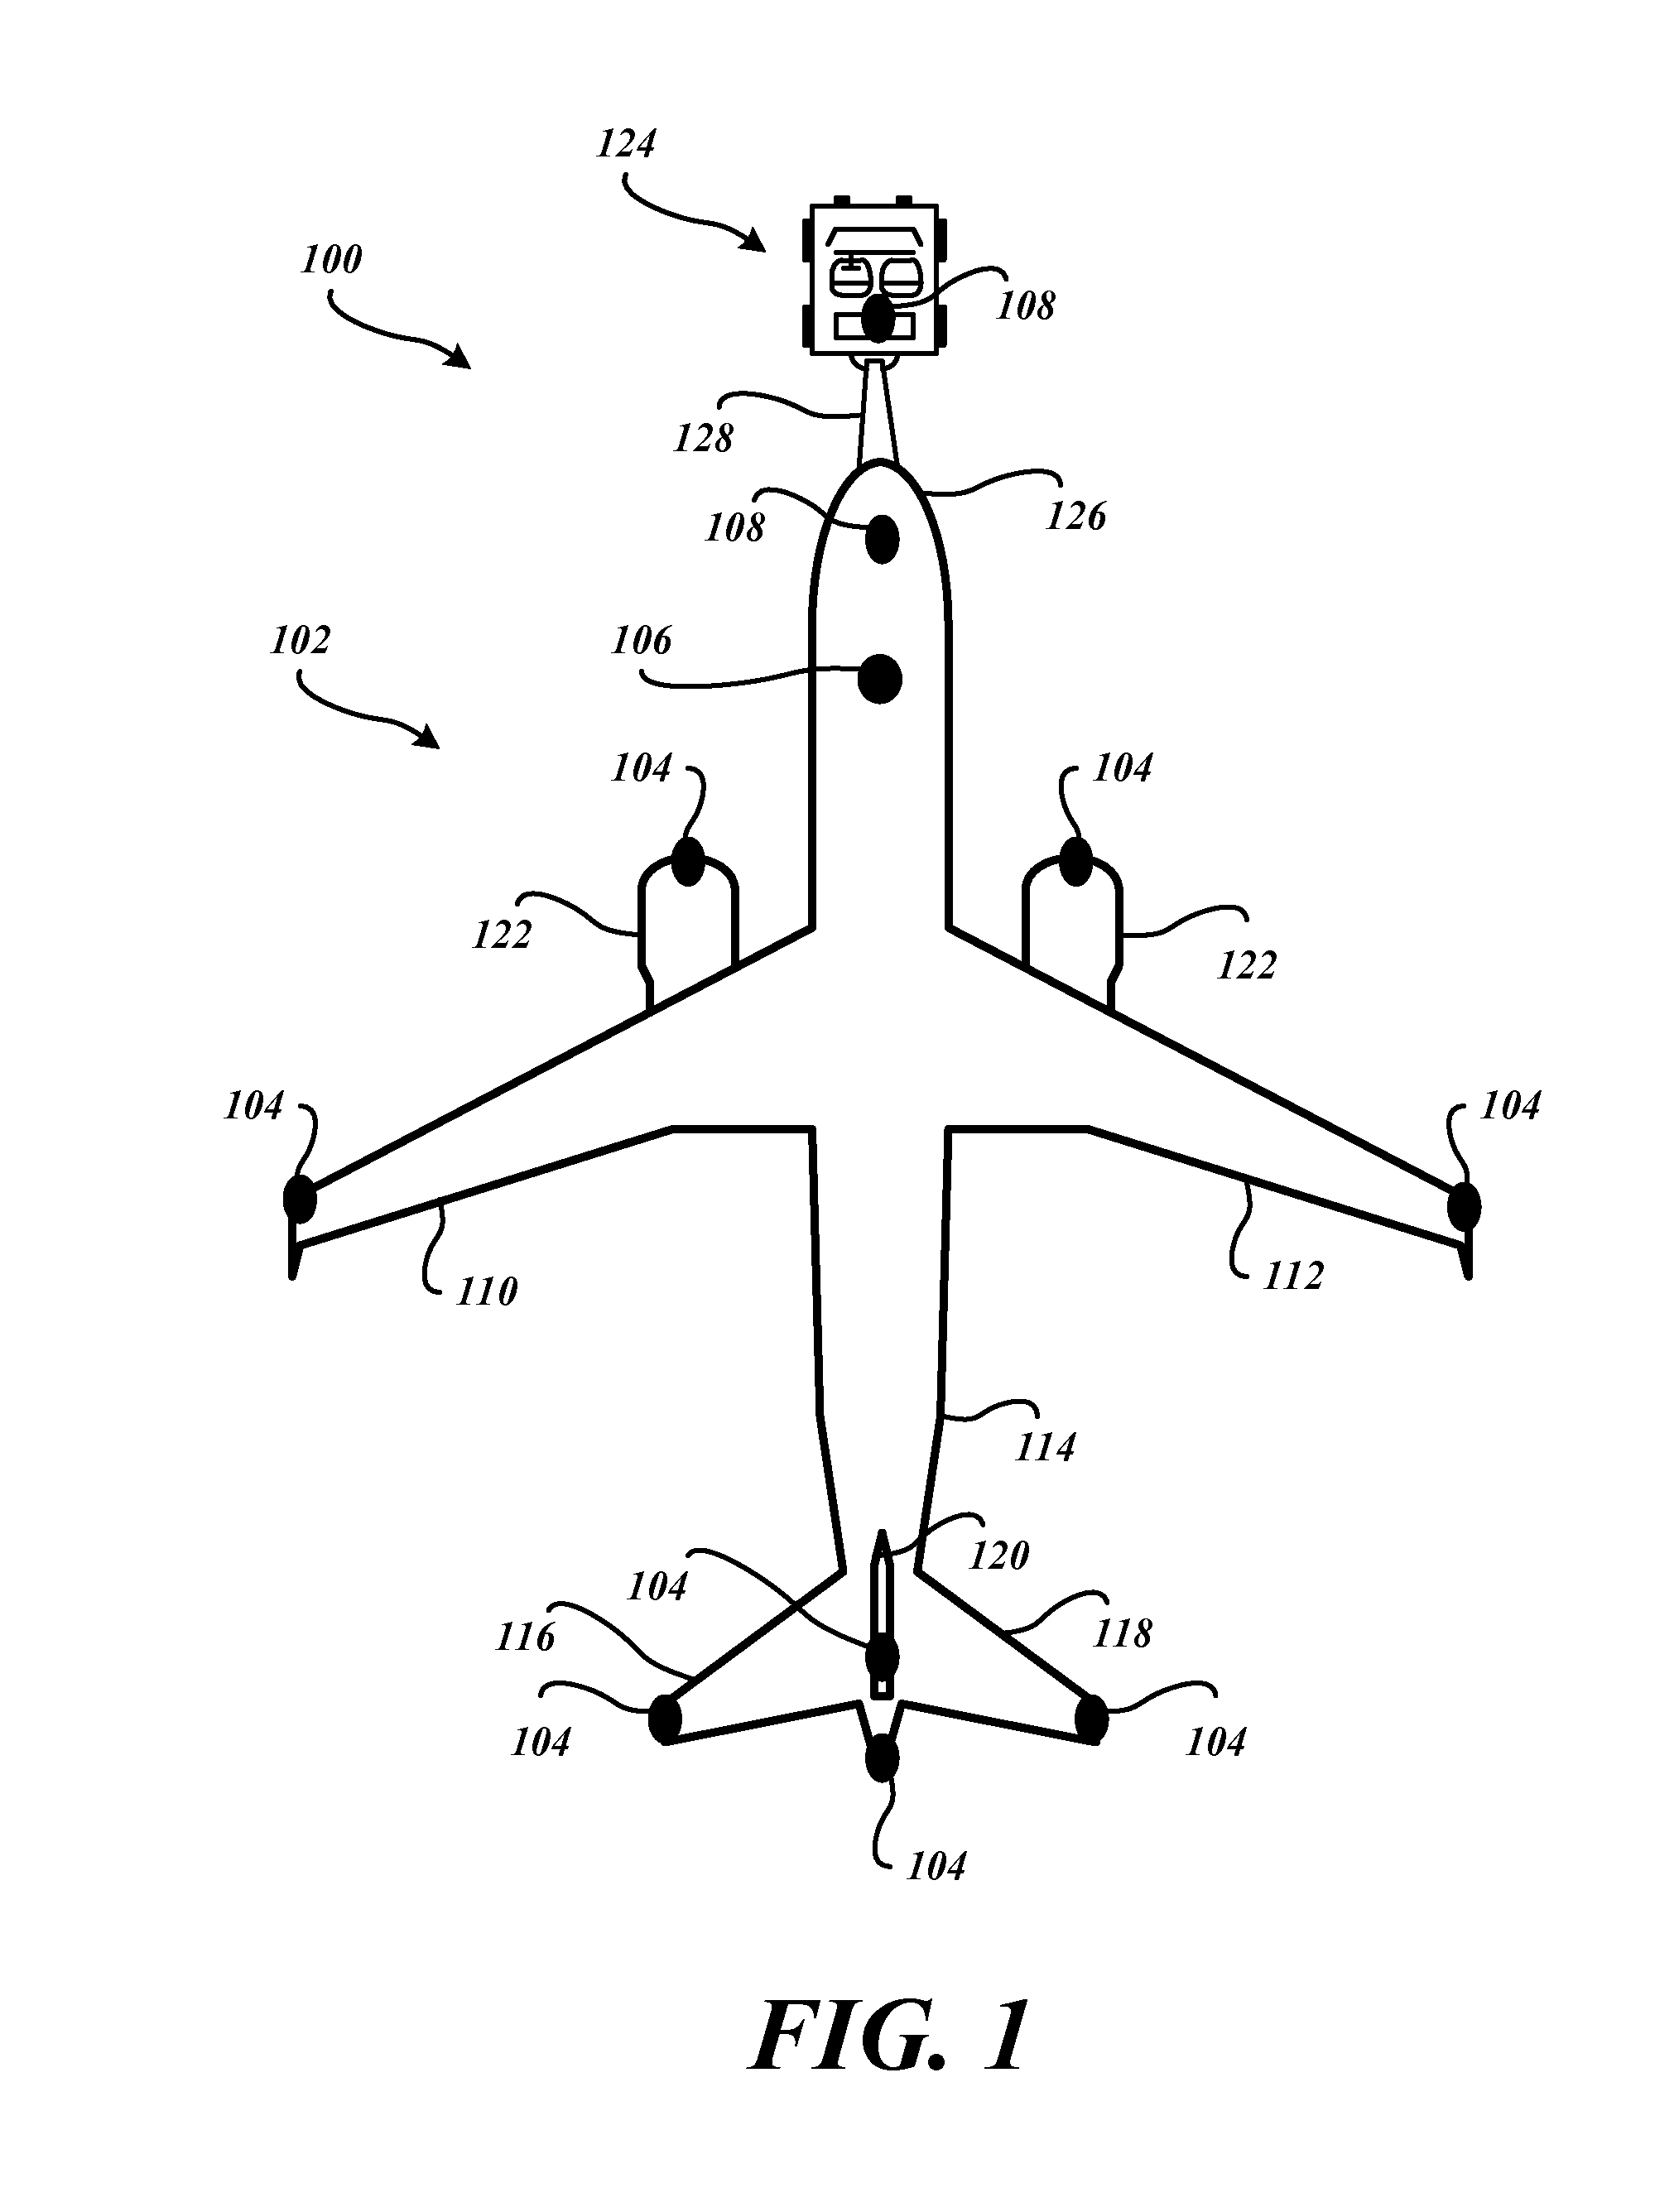 Collision-avoidance system for ground crew using sensors